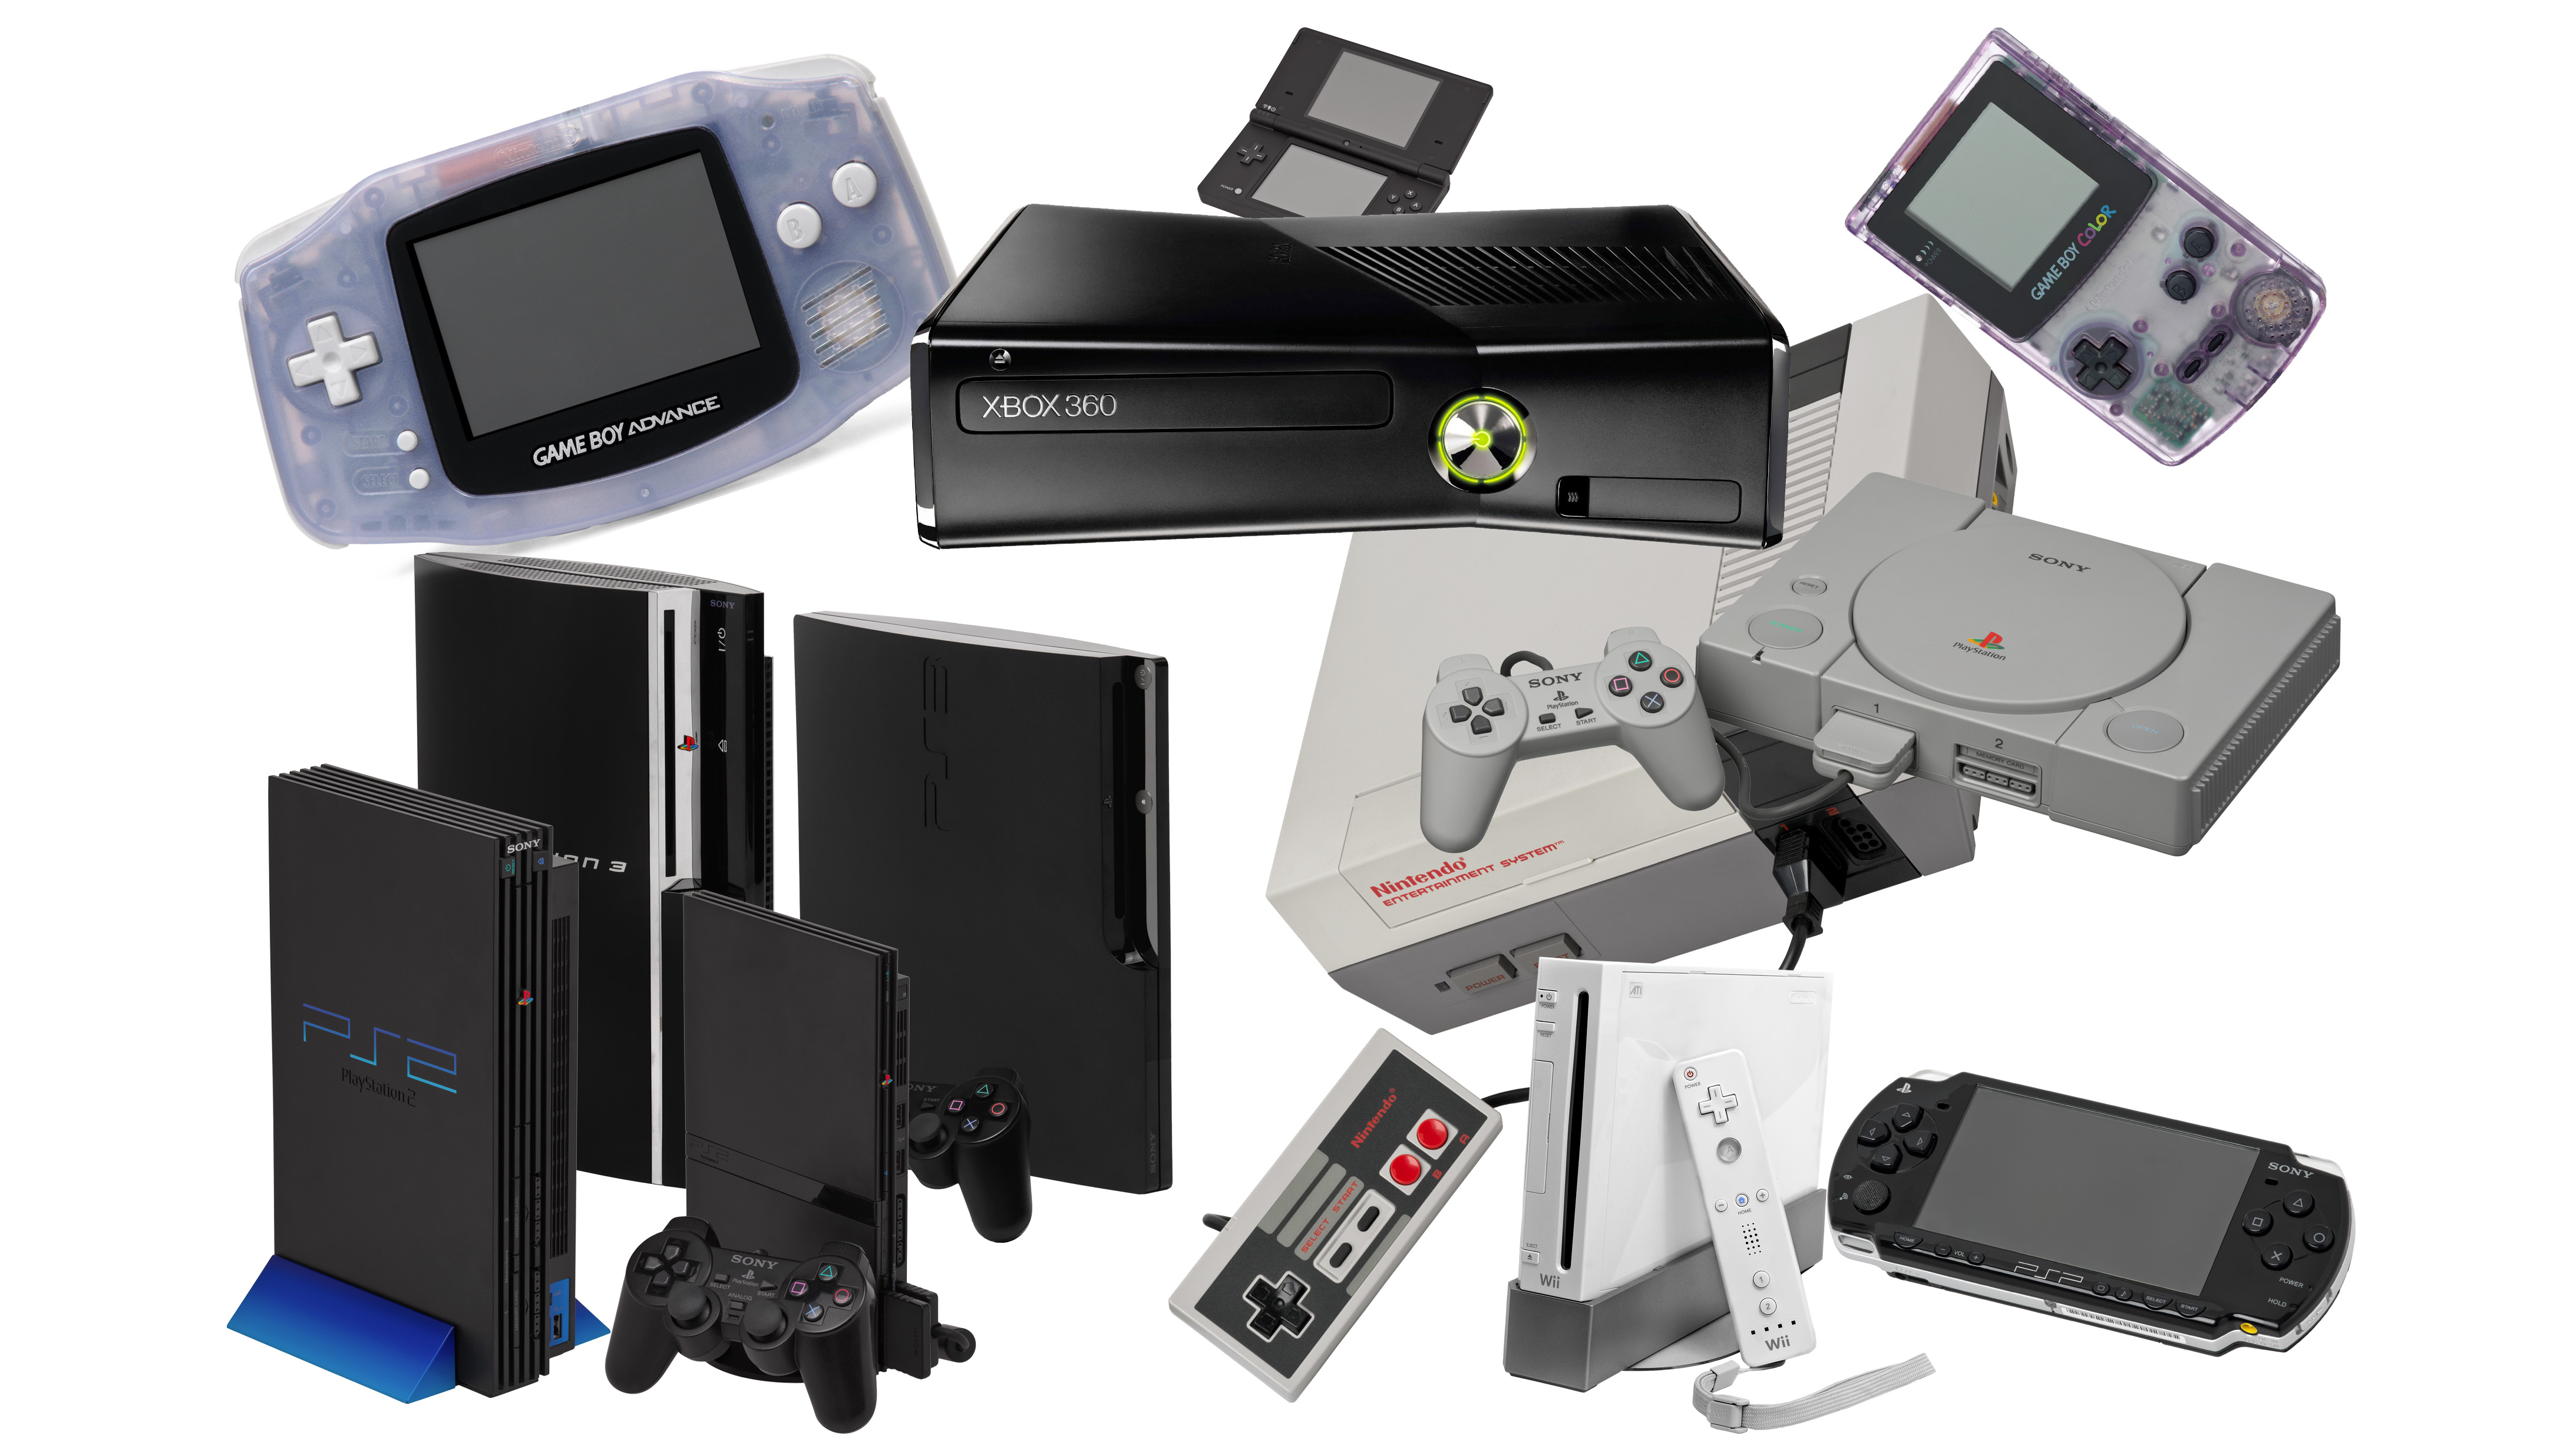 10 best selling video game consoles of all time | T3